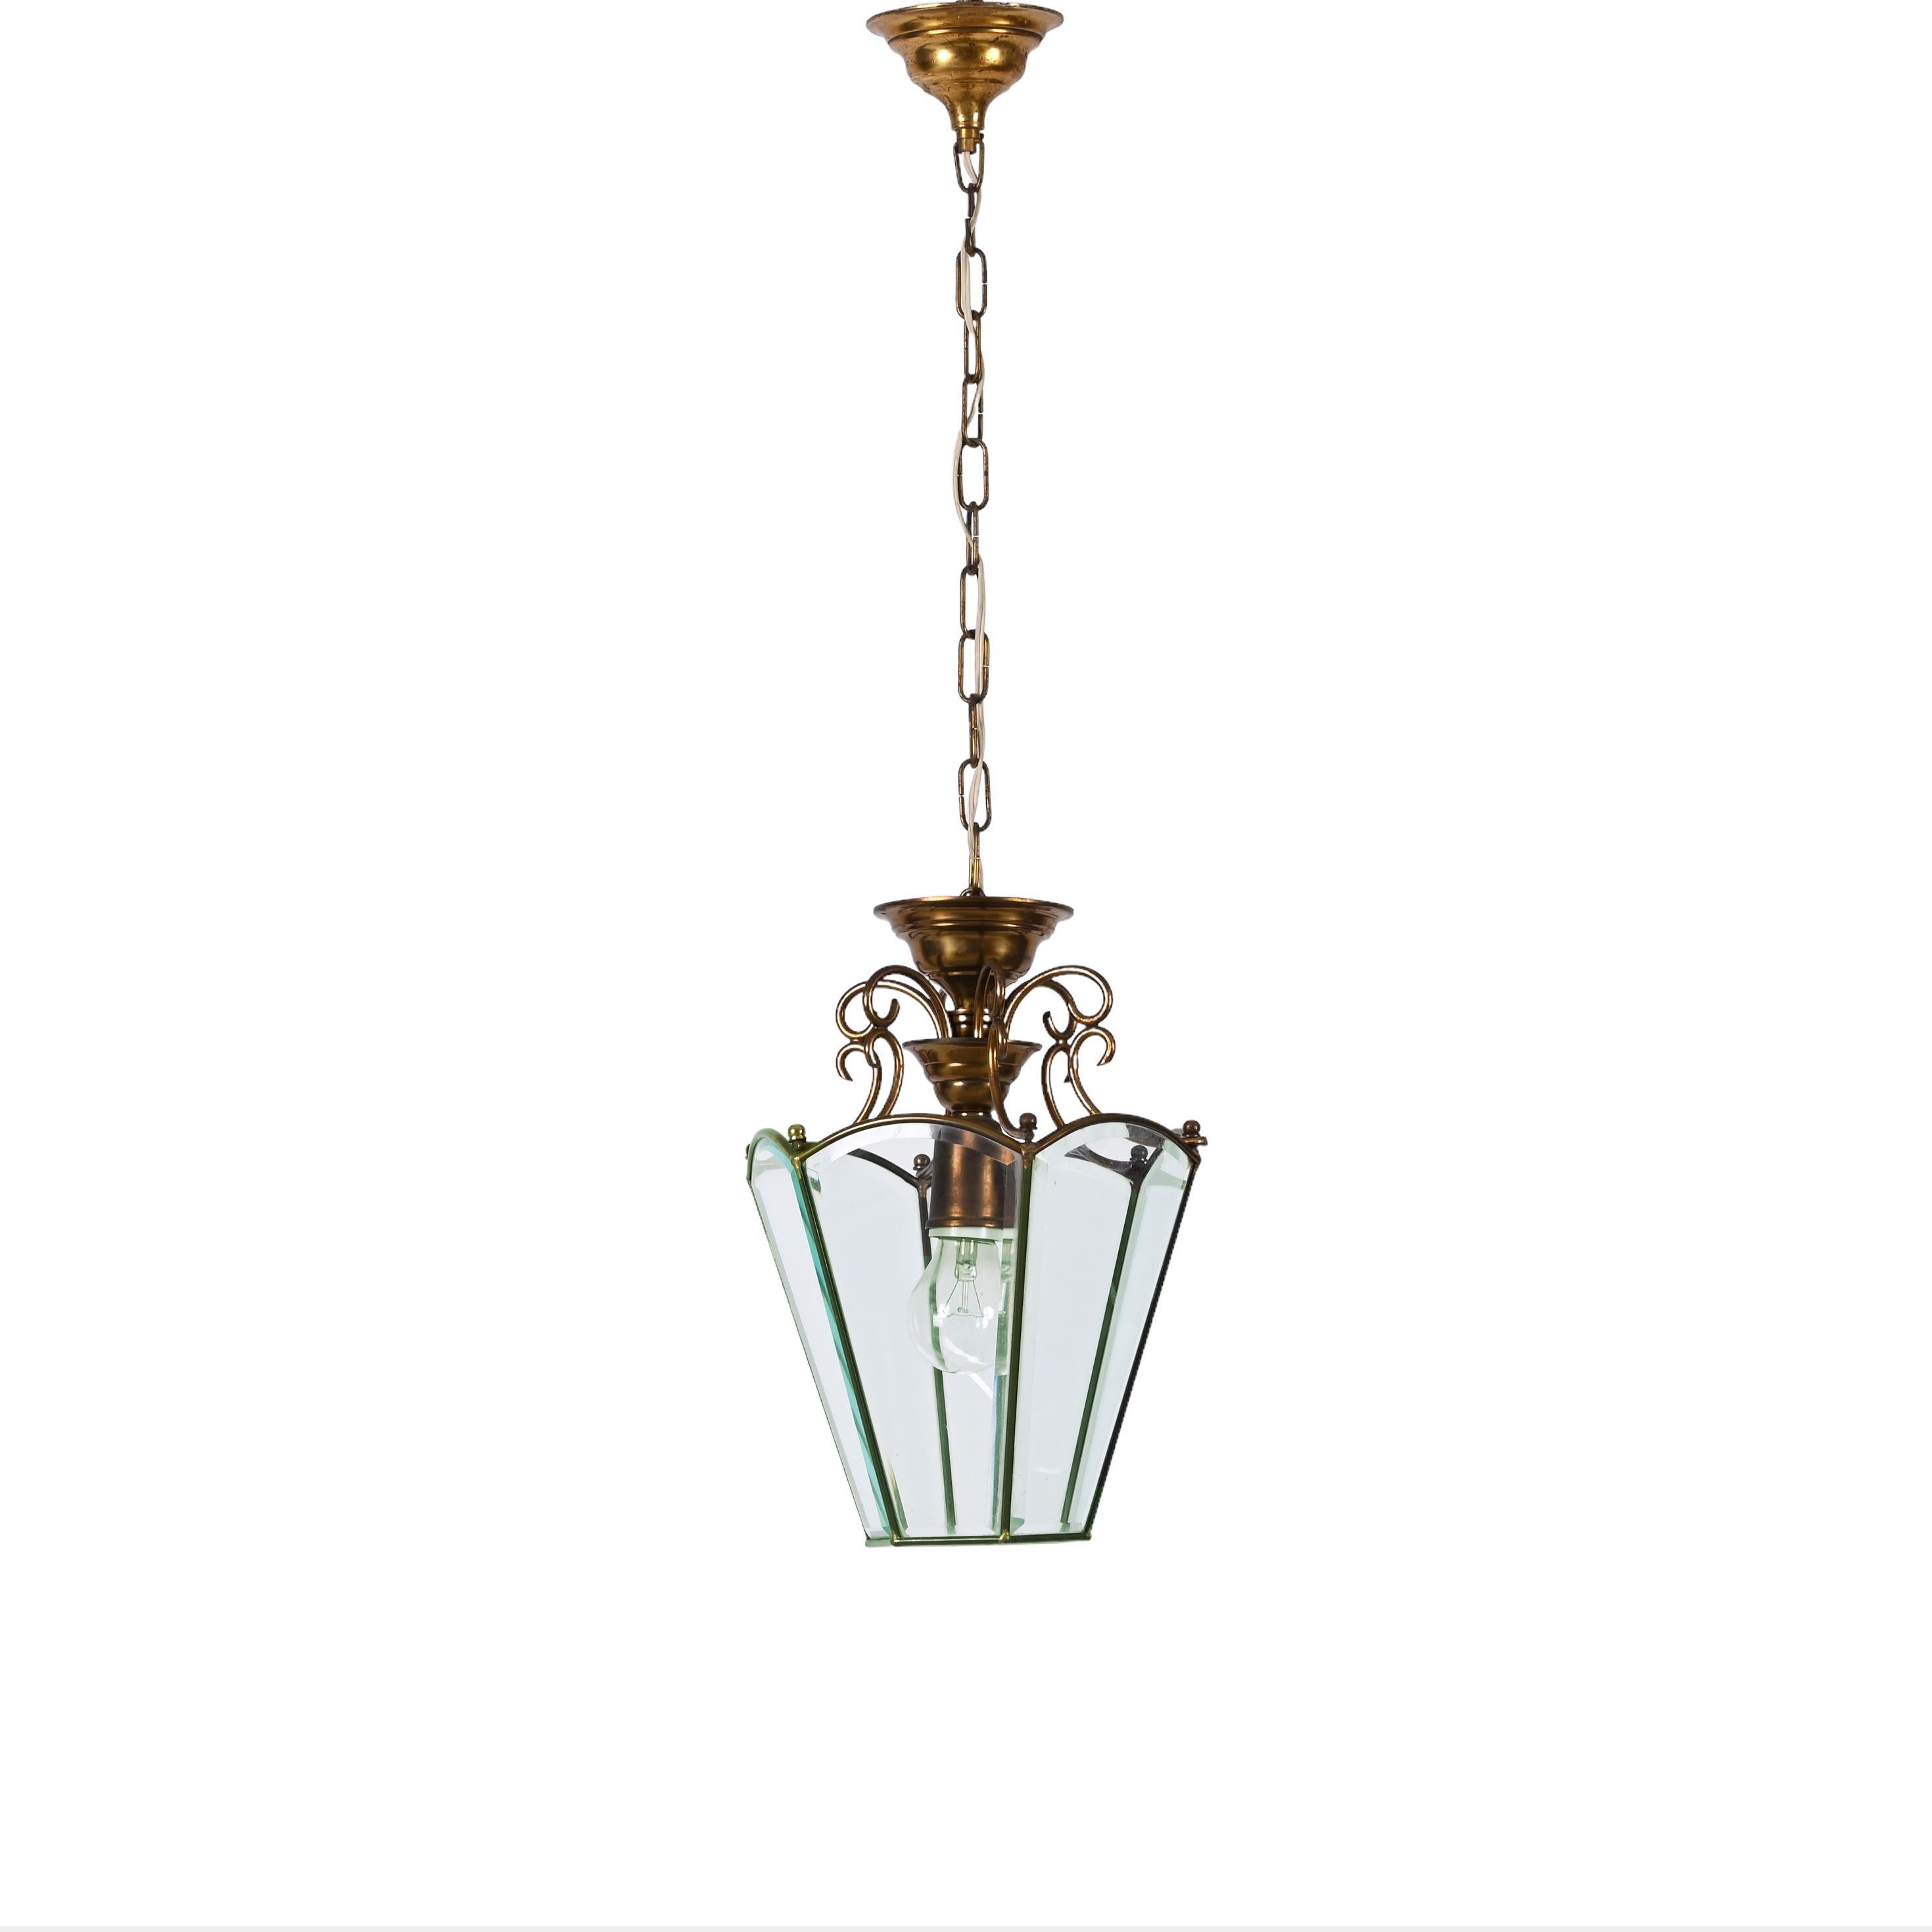 Brass and Beveled Glass Hexagonal Italian Chandelier After Adolf Loos, 1950s For Sale 12